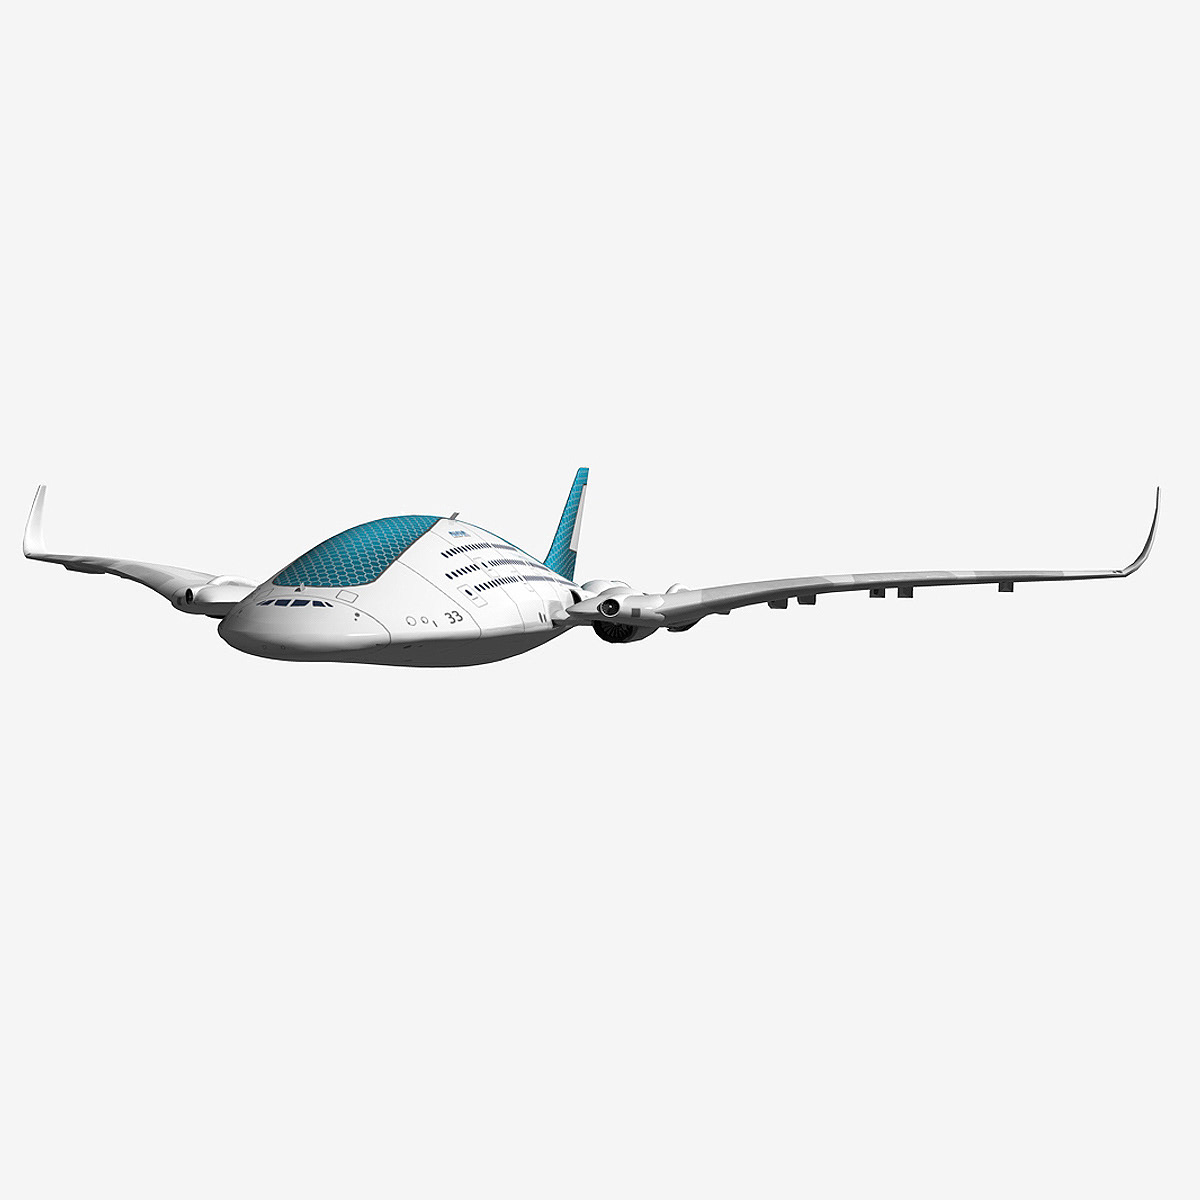 concept airplane Airlines future innovation